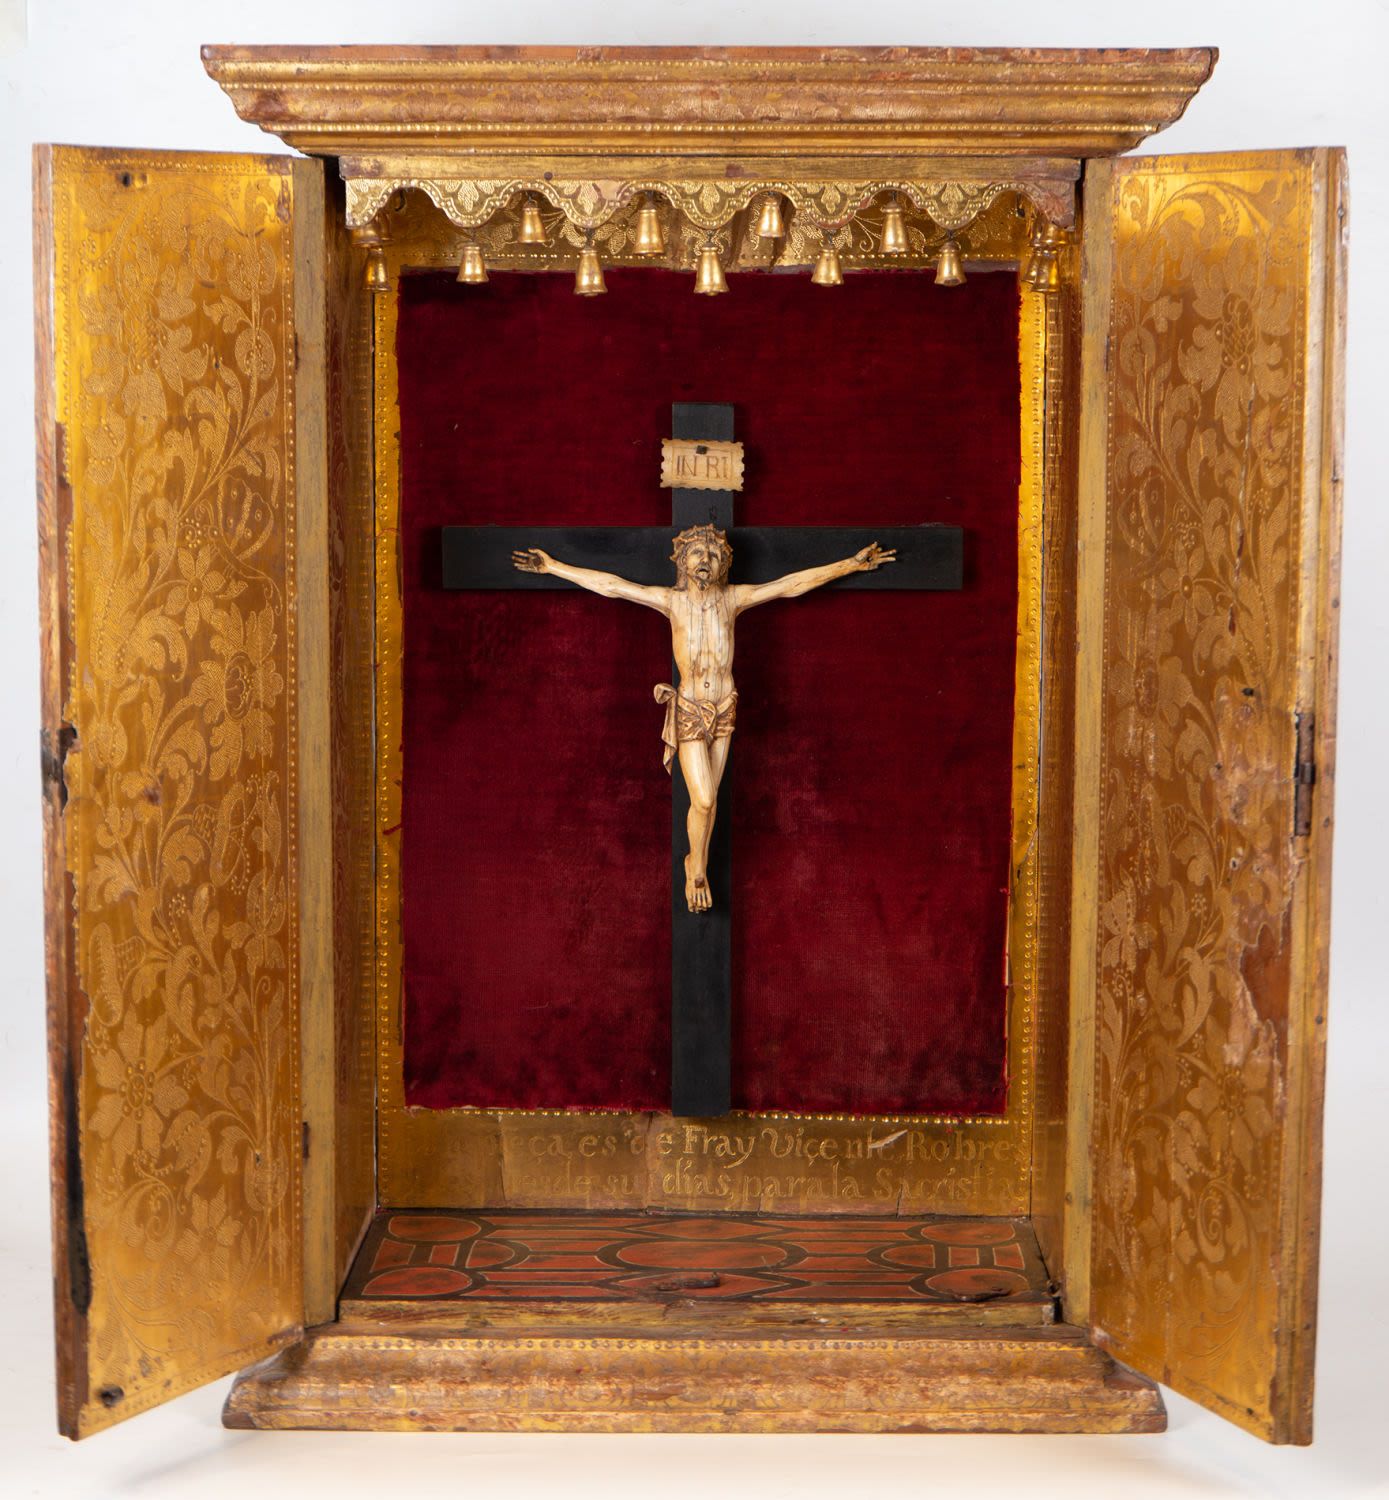 Polychrome Portable Altar with Christ in Ivory, Spain, 16th century Niche en boi&hellip;